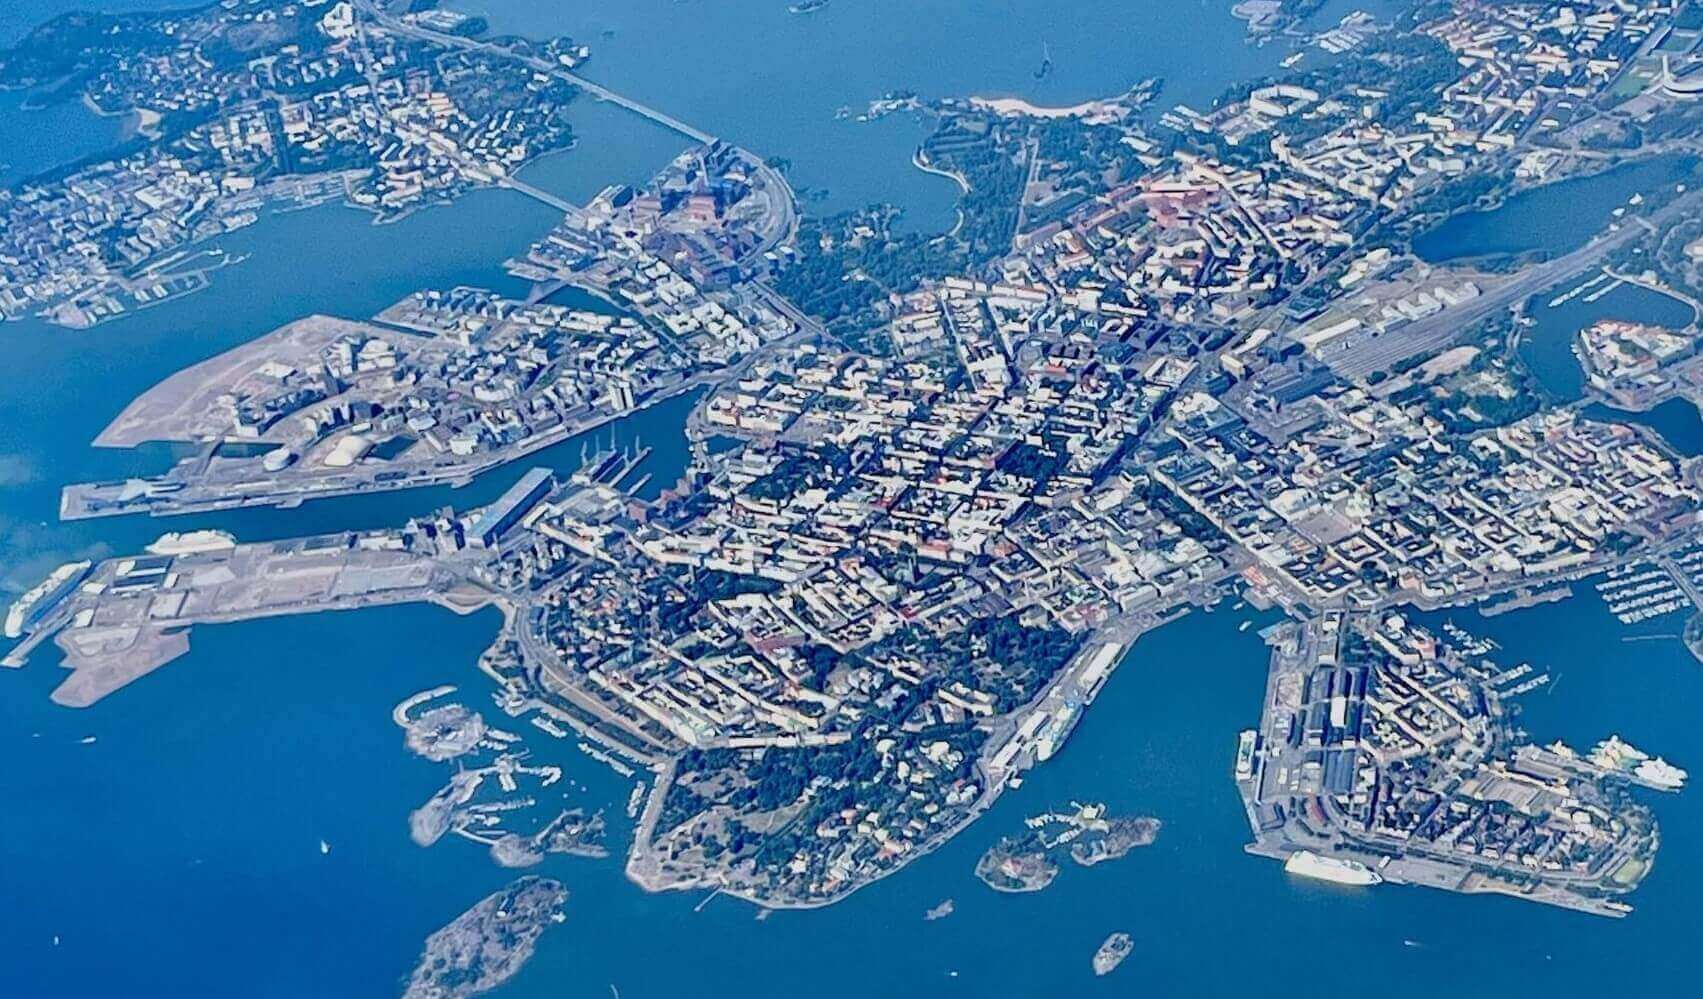 view of helsinki from the plane